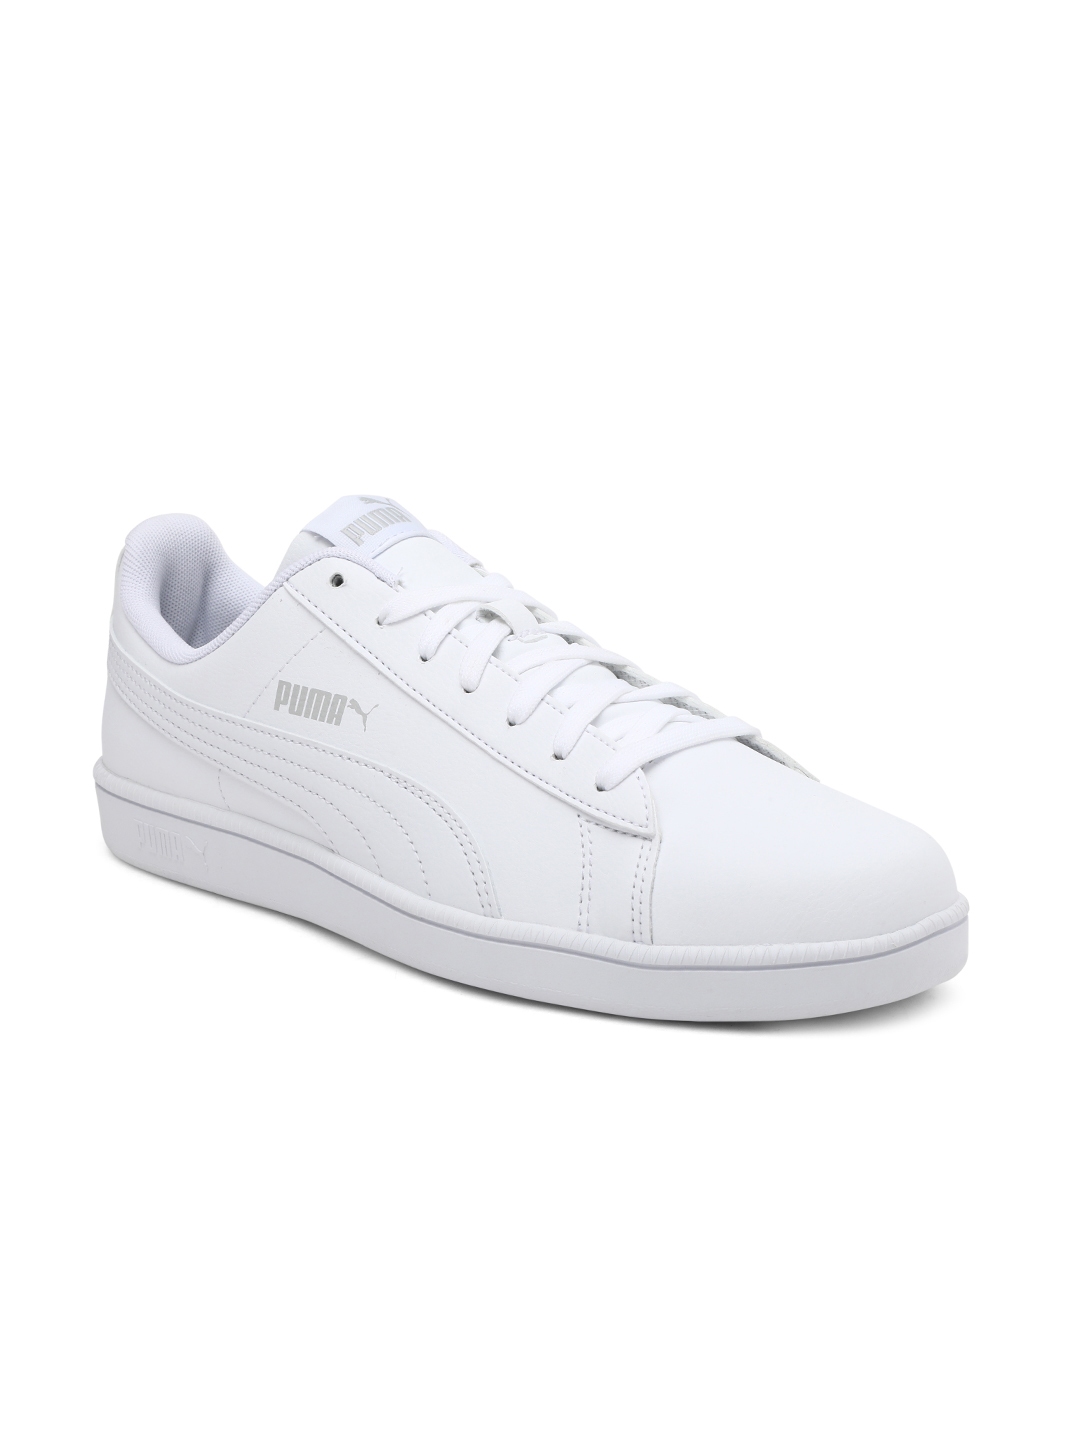 Buy Puma Unisex White UP Sneakers - Casual Shoes for Unisex 11420778 ...